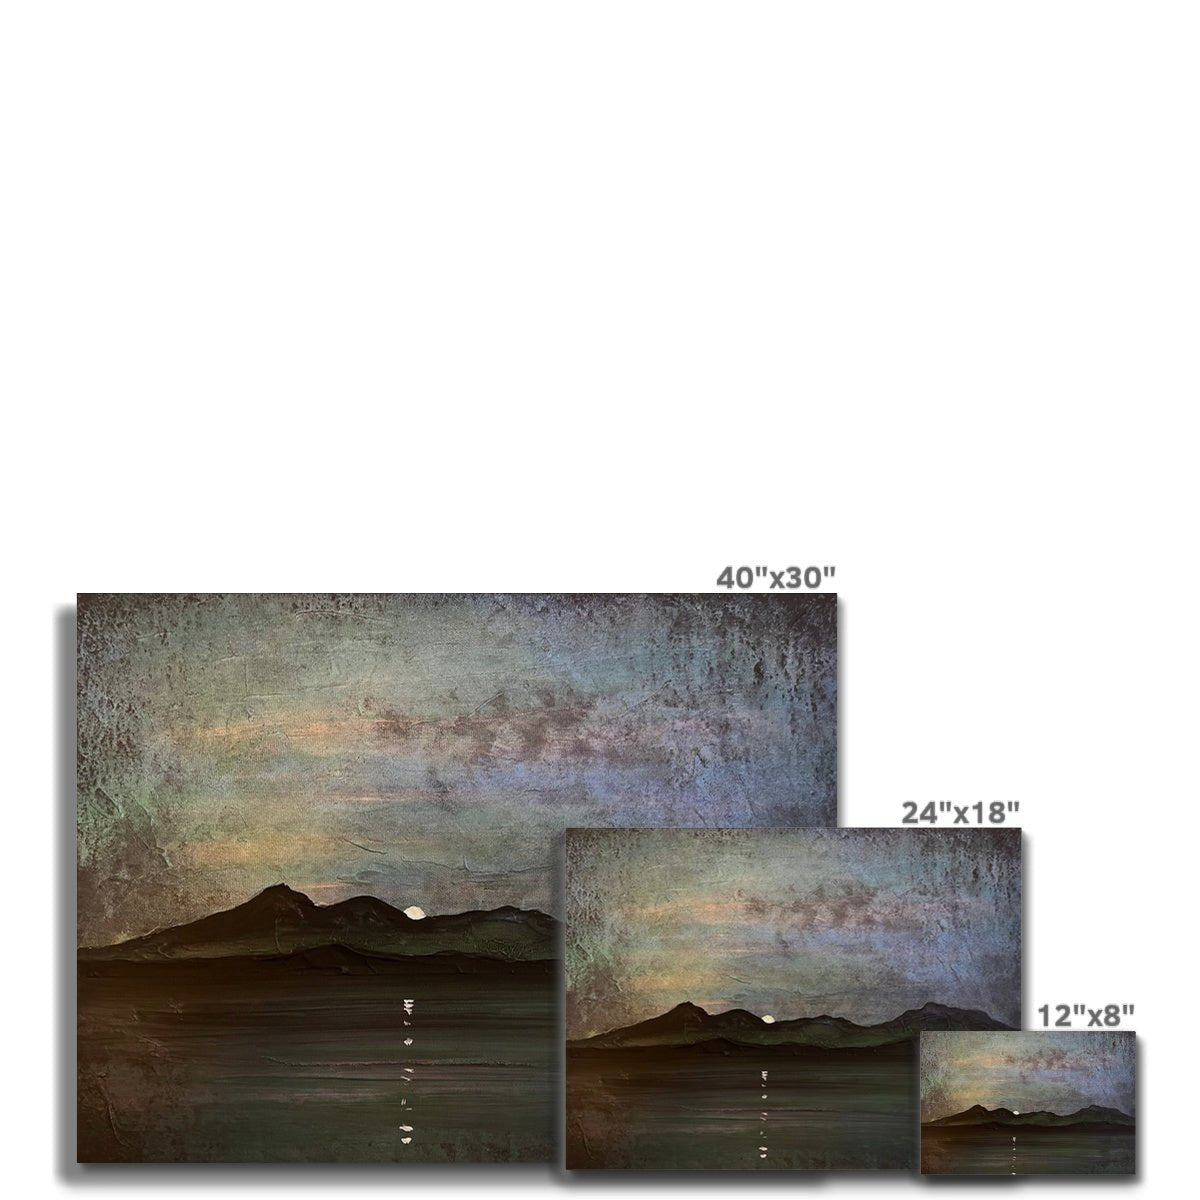 Sleeping Warrior Moonlight Arran Painting | Canvas From Scotland-Contemporary Stretched Canvas Prints-Arran Art Gallery-Paintings, Prints, Homeware, Art Gifts From Scotland By Scottish Artist Kevin Hunter